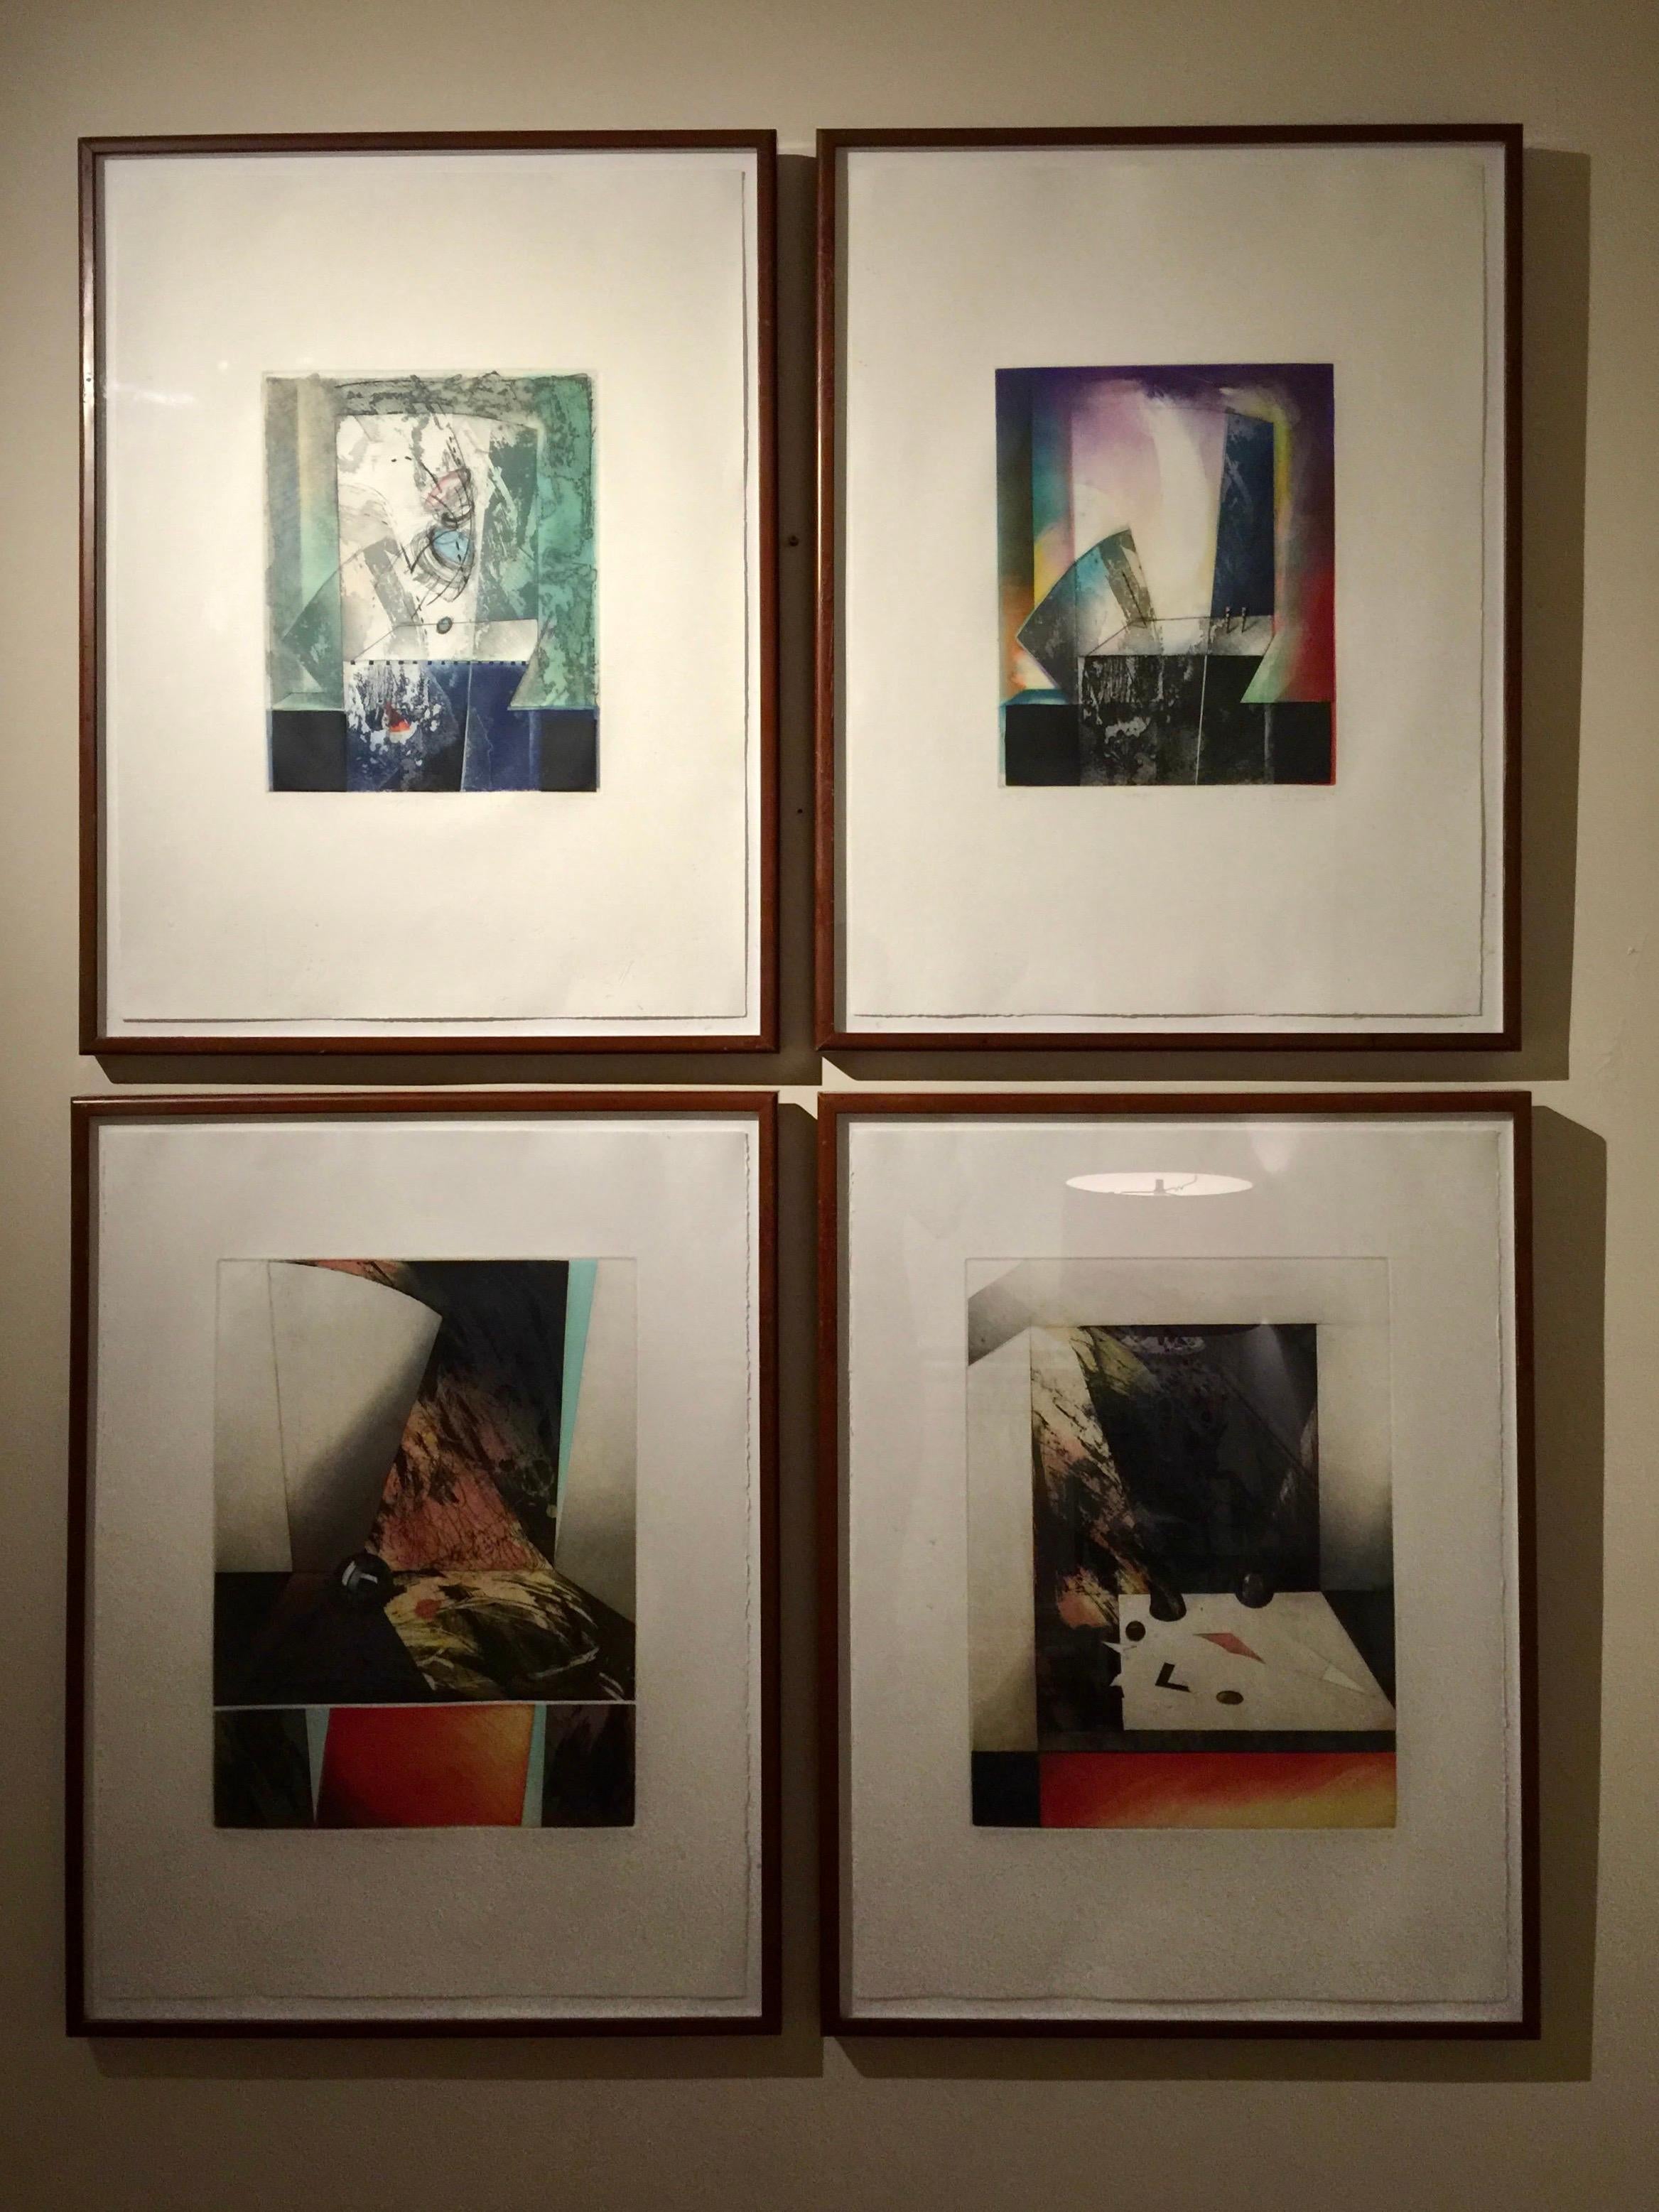 Set of 4 signed abstract intaglio prints by Kazuko Watanabe, framed. Signed in pencil by the artist and numbered 16/30, 19/20, 7/10, 9/10.

Kazuko Watanabe is a graduate of the San Francisco Academy of Art University and has taught classes on